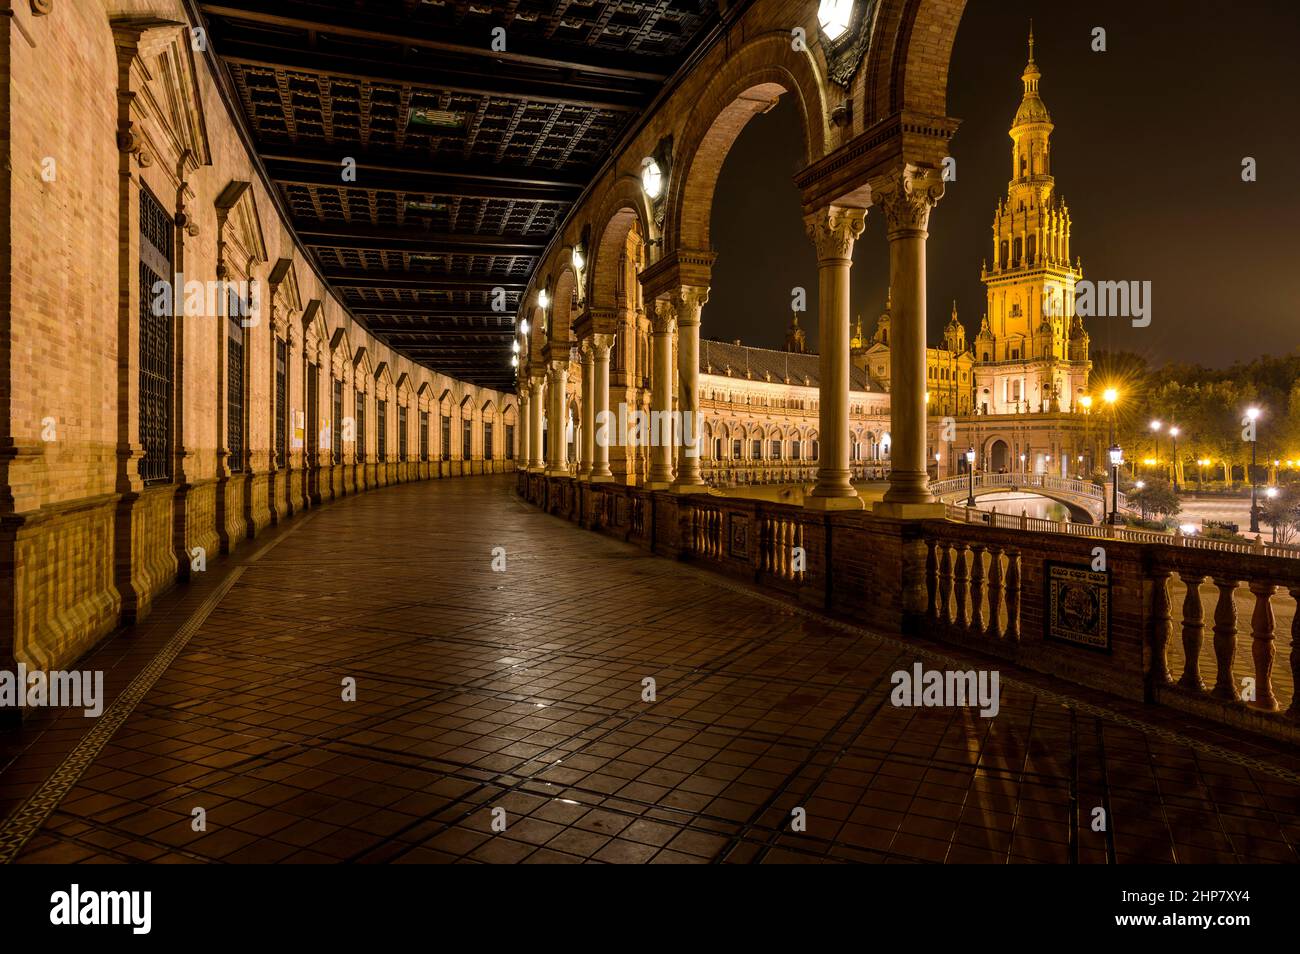 Spanish Square - Night view of the illuminated ground-level portico curving along the semi-circular brick building at Spanish Square, Seville, Spain. Stock Photo